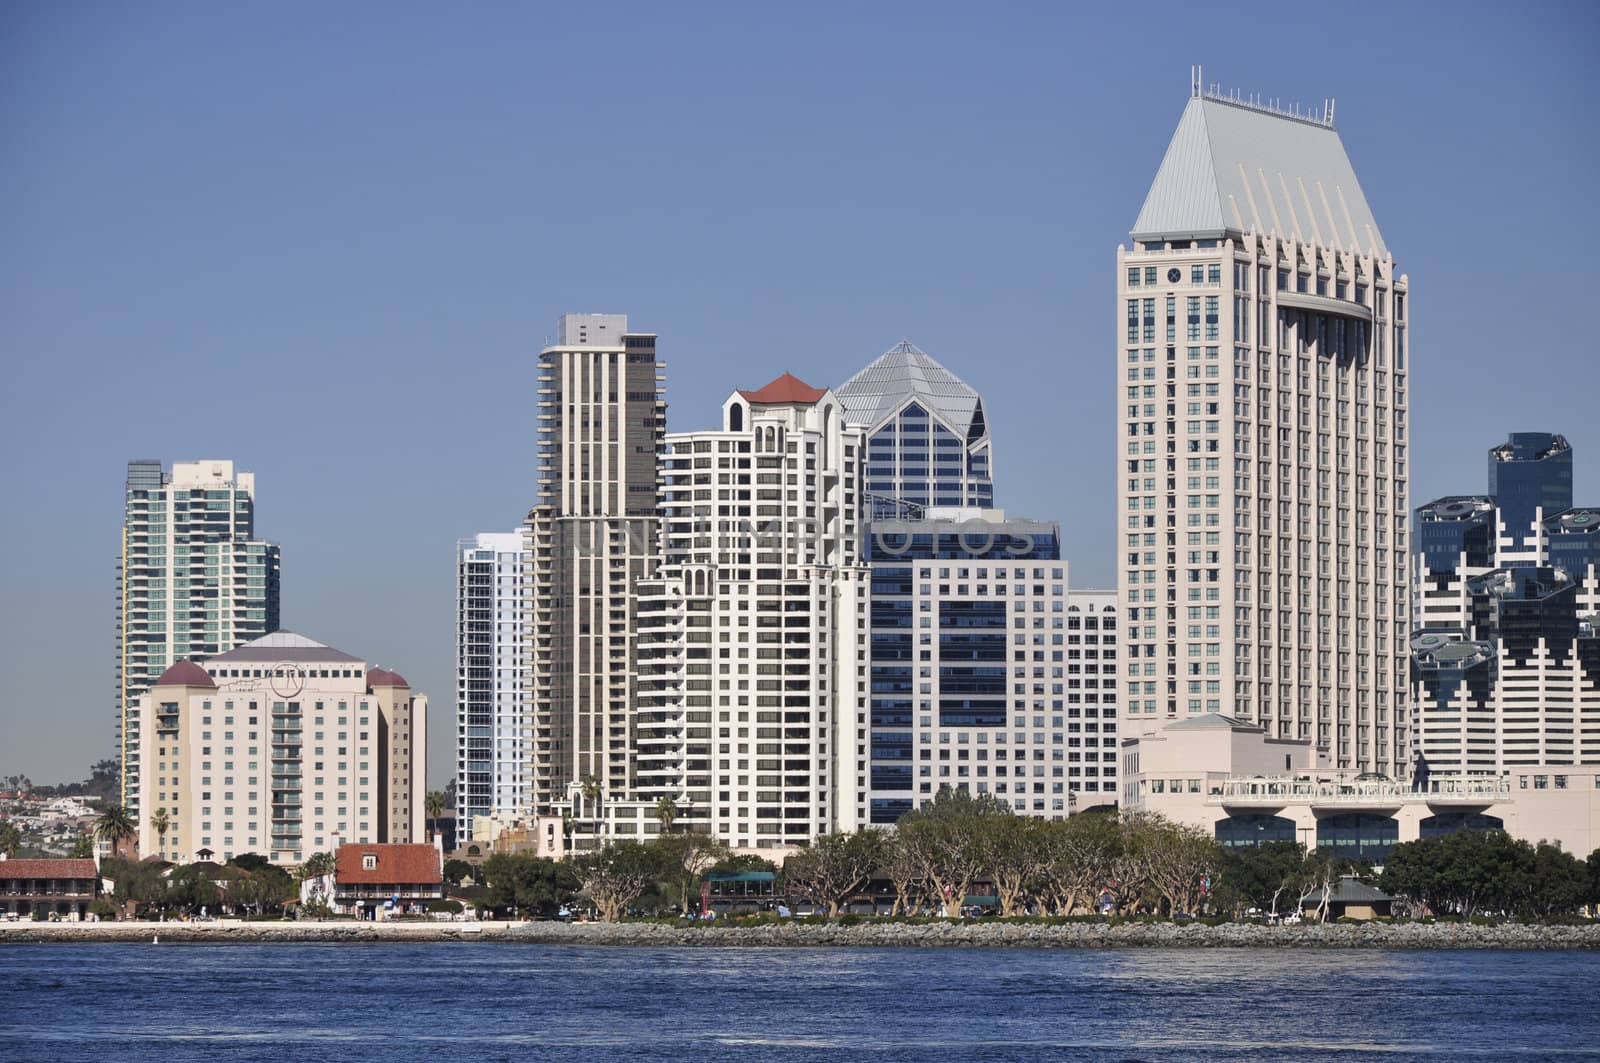 Tall office and hotel towers line the waterfront in San Diego, California.